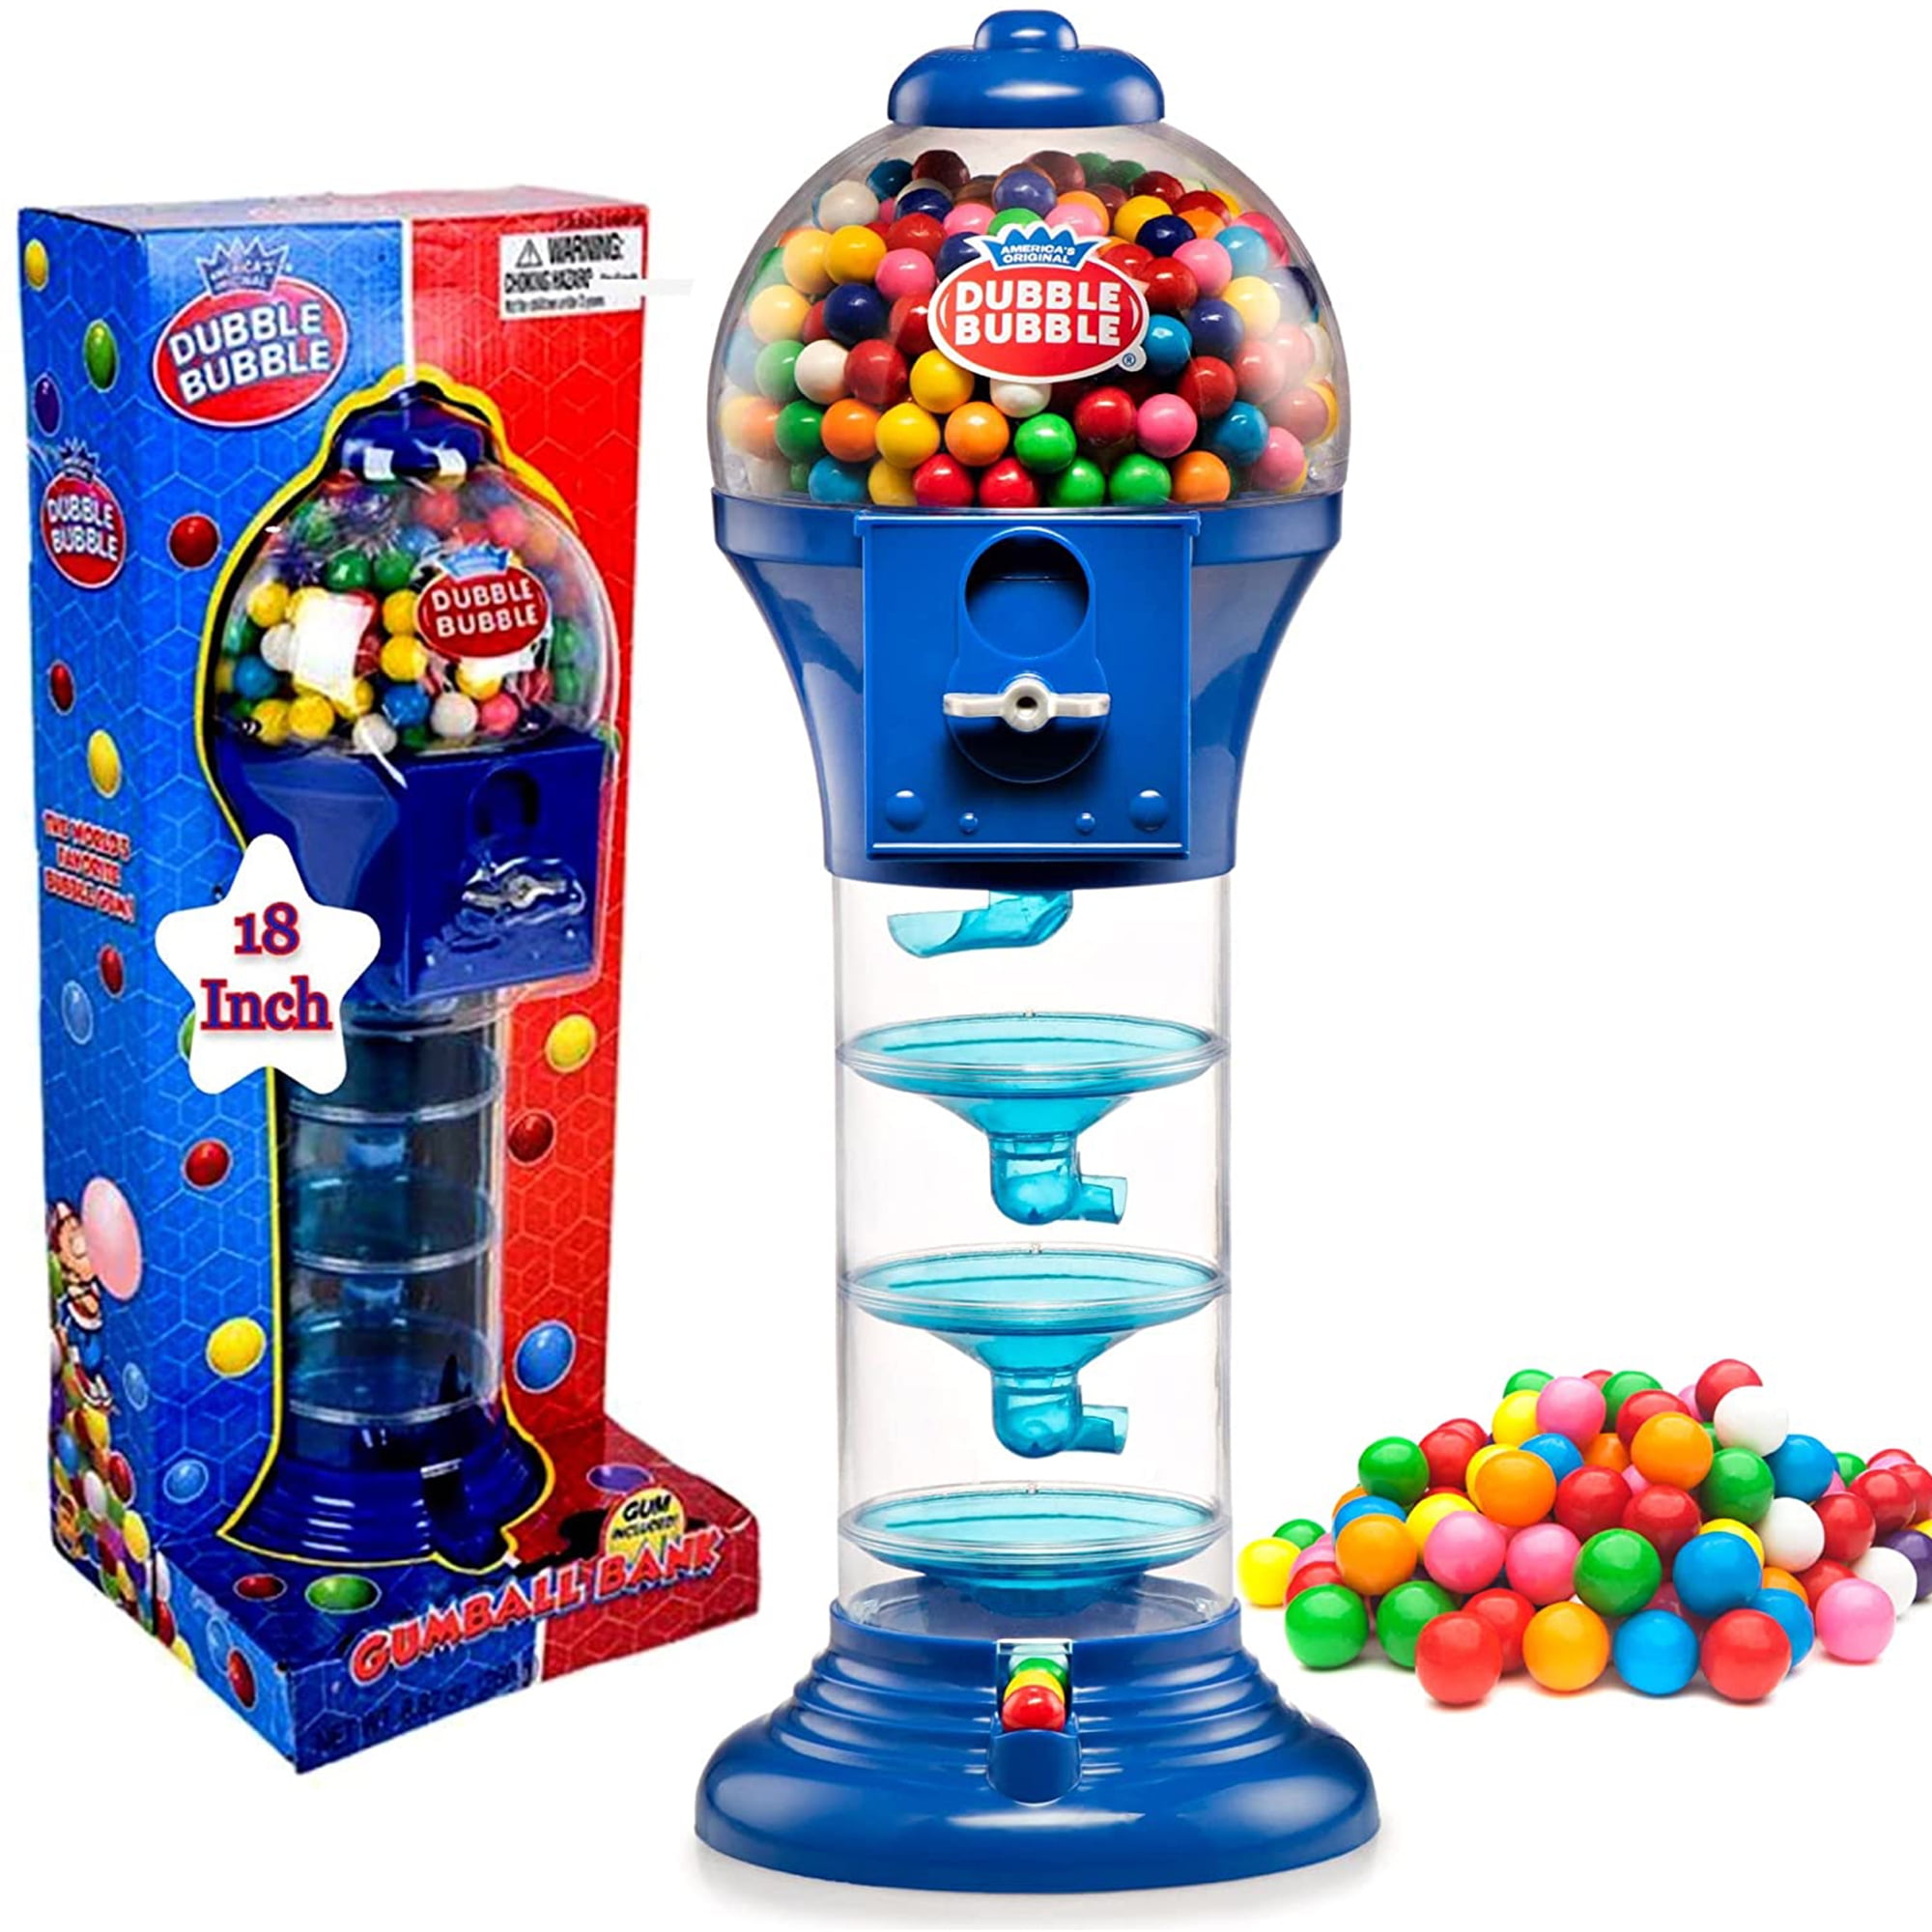 Playo 18” Big Spiral Gumball Machine For Kids Candy Dispenser with